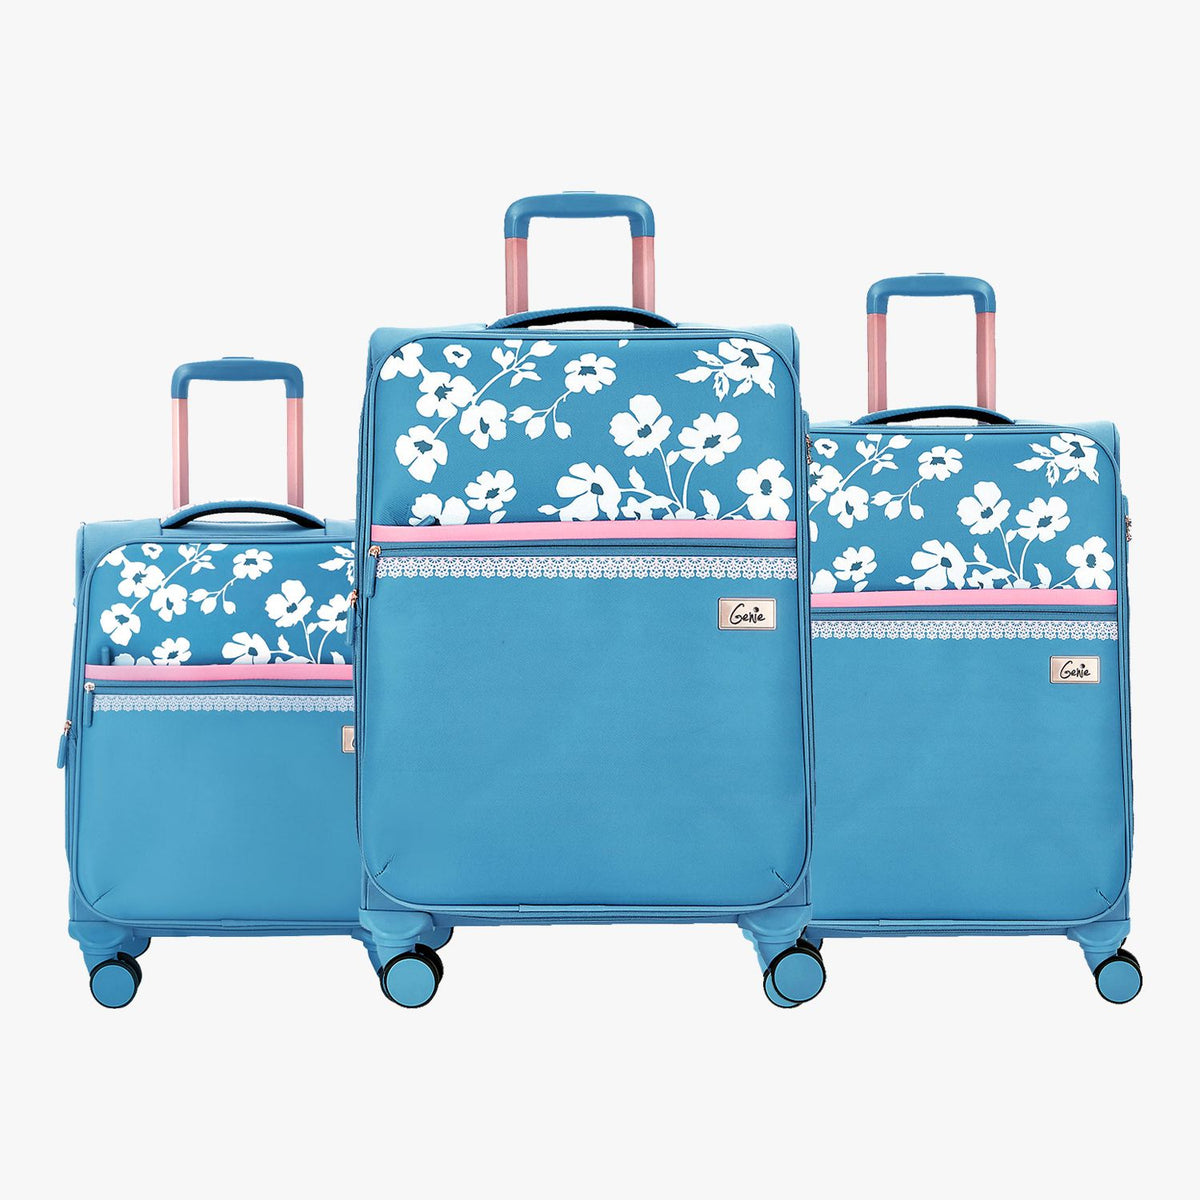 Multifunctional Rolling Luggage With Cup Holder, Spinner Wheels, And Lovely  Tutku Biscuit Design Perfect For Travel From Dreweubanks, $214.92